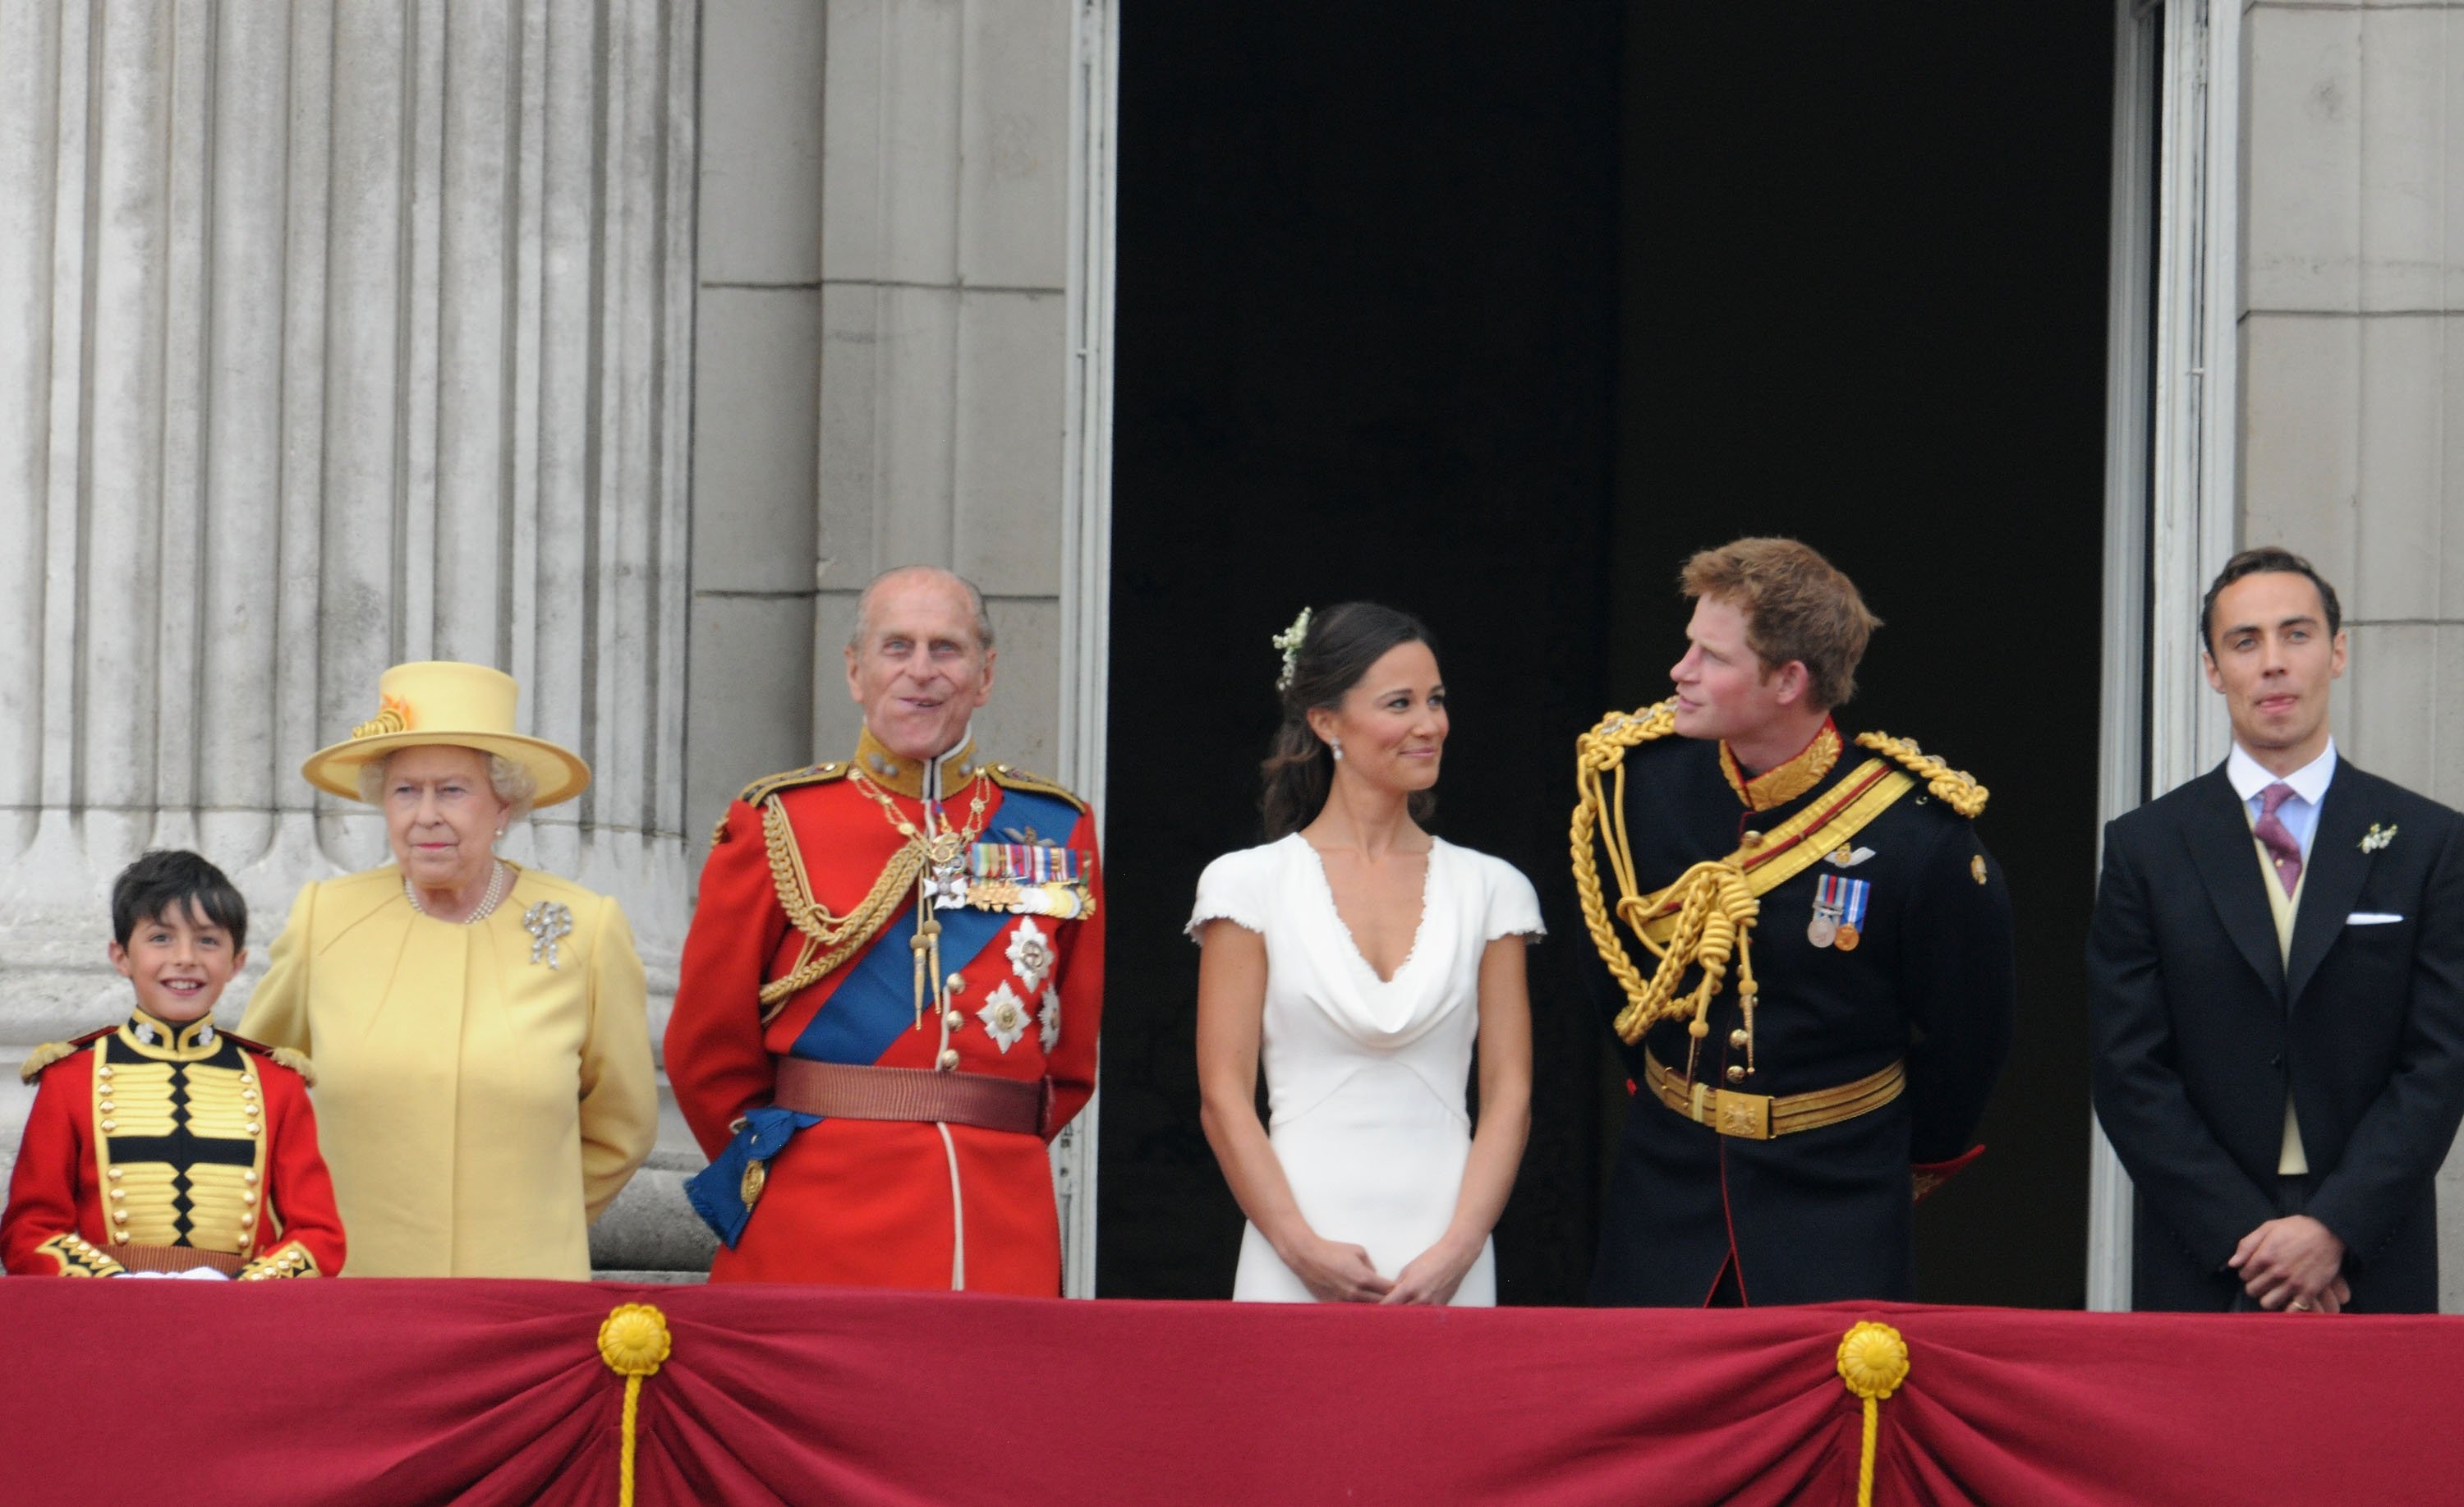 (L-R) Master William Lowther-Pinkerton, Queen Elizabeth II, Prince Philip, Pippa Middleton, Prince Harry and James Middleton look at the crowds from the balcony of Buckingham Palace following a royal wedding on April 29, 2011 in London, England ┃Source: Getty Images